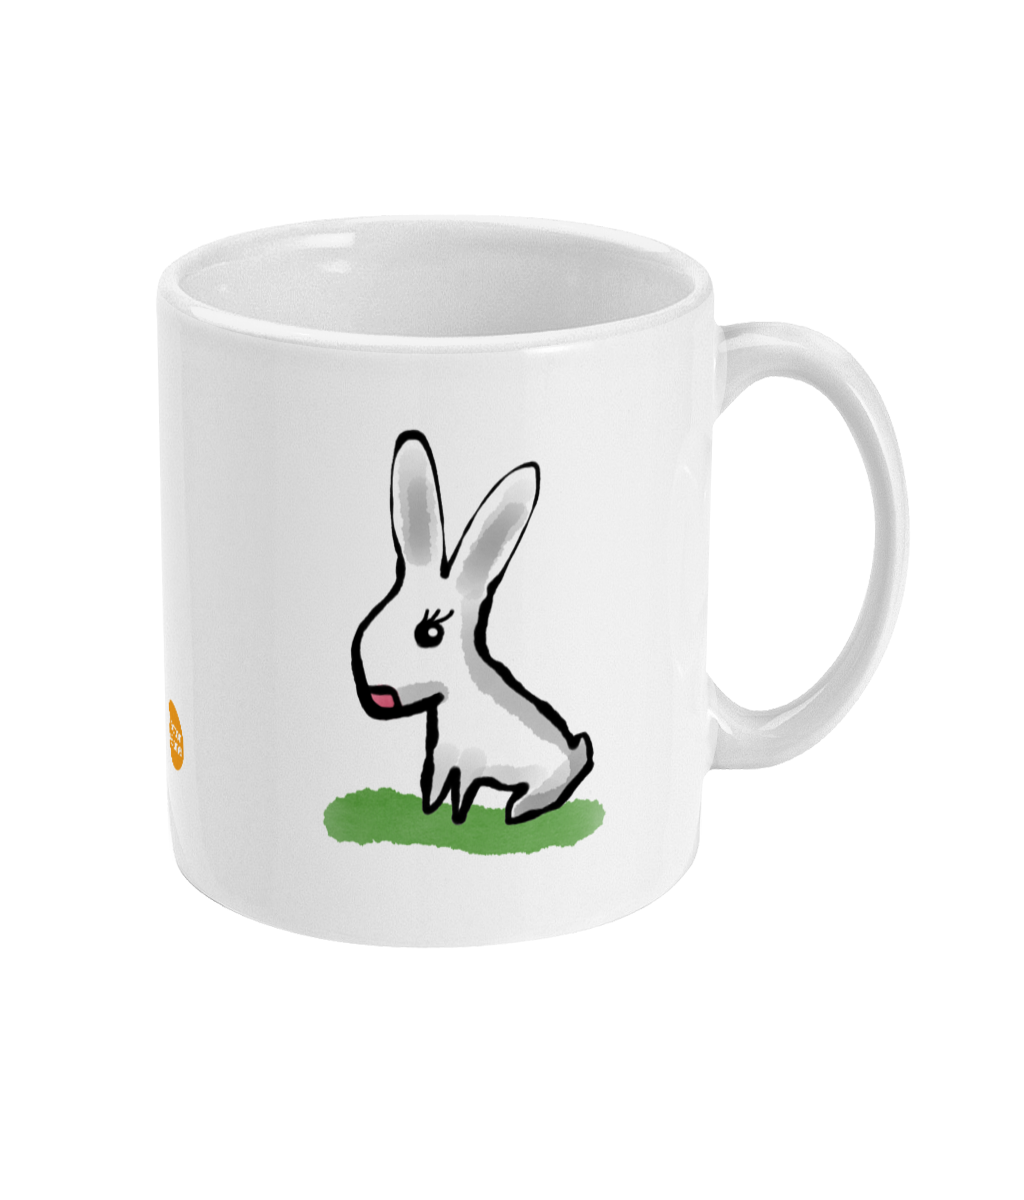 Cute Bunny design coffee mug by Hector and Bone Right View